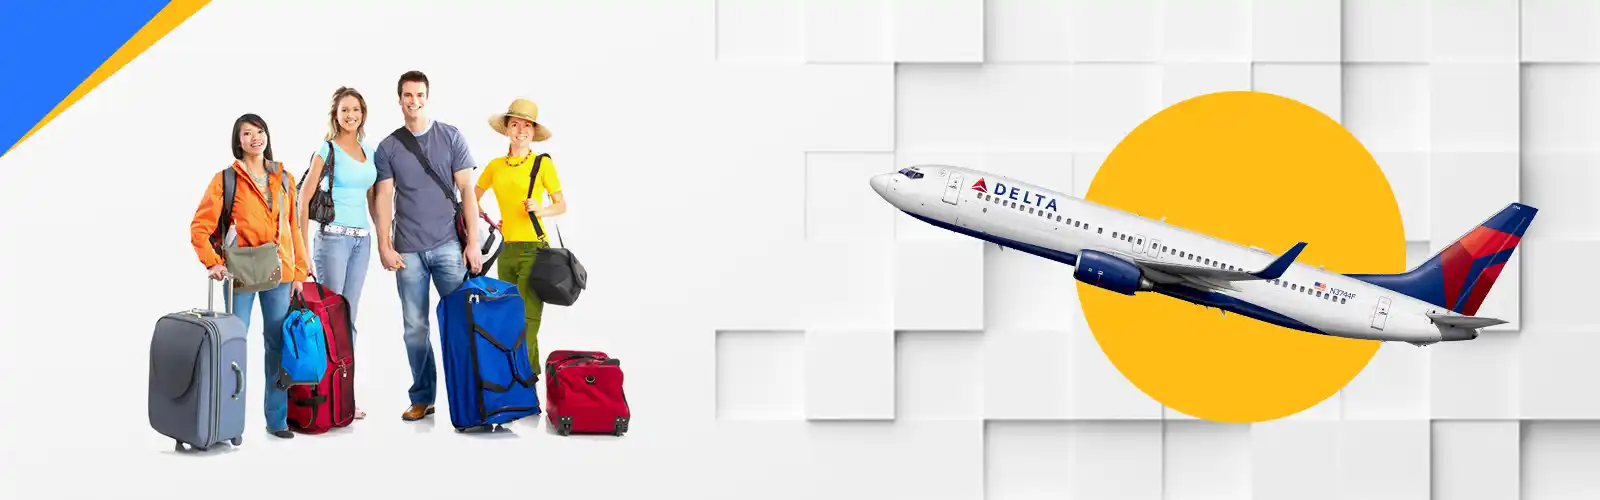 Delta-Airlines-Group-Travel